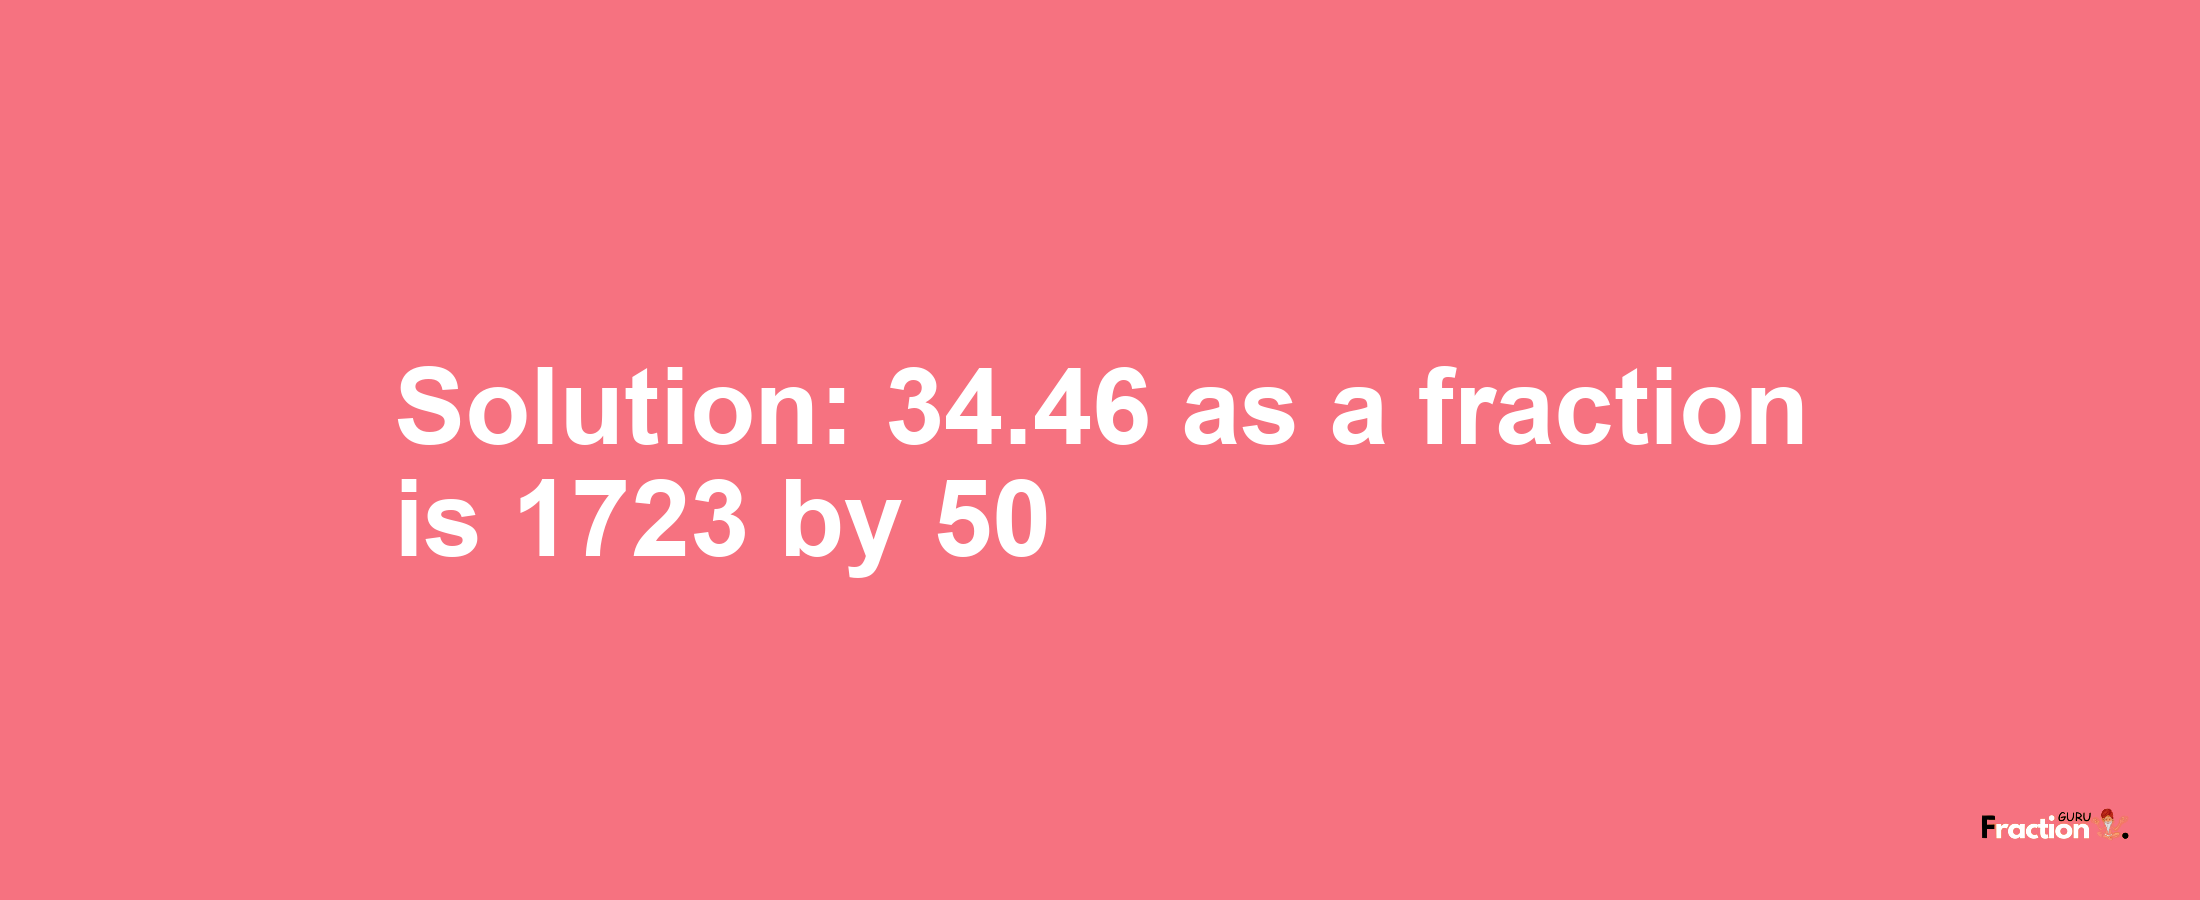 Solution:34.46 as a fraction is 1723/50